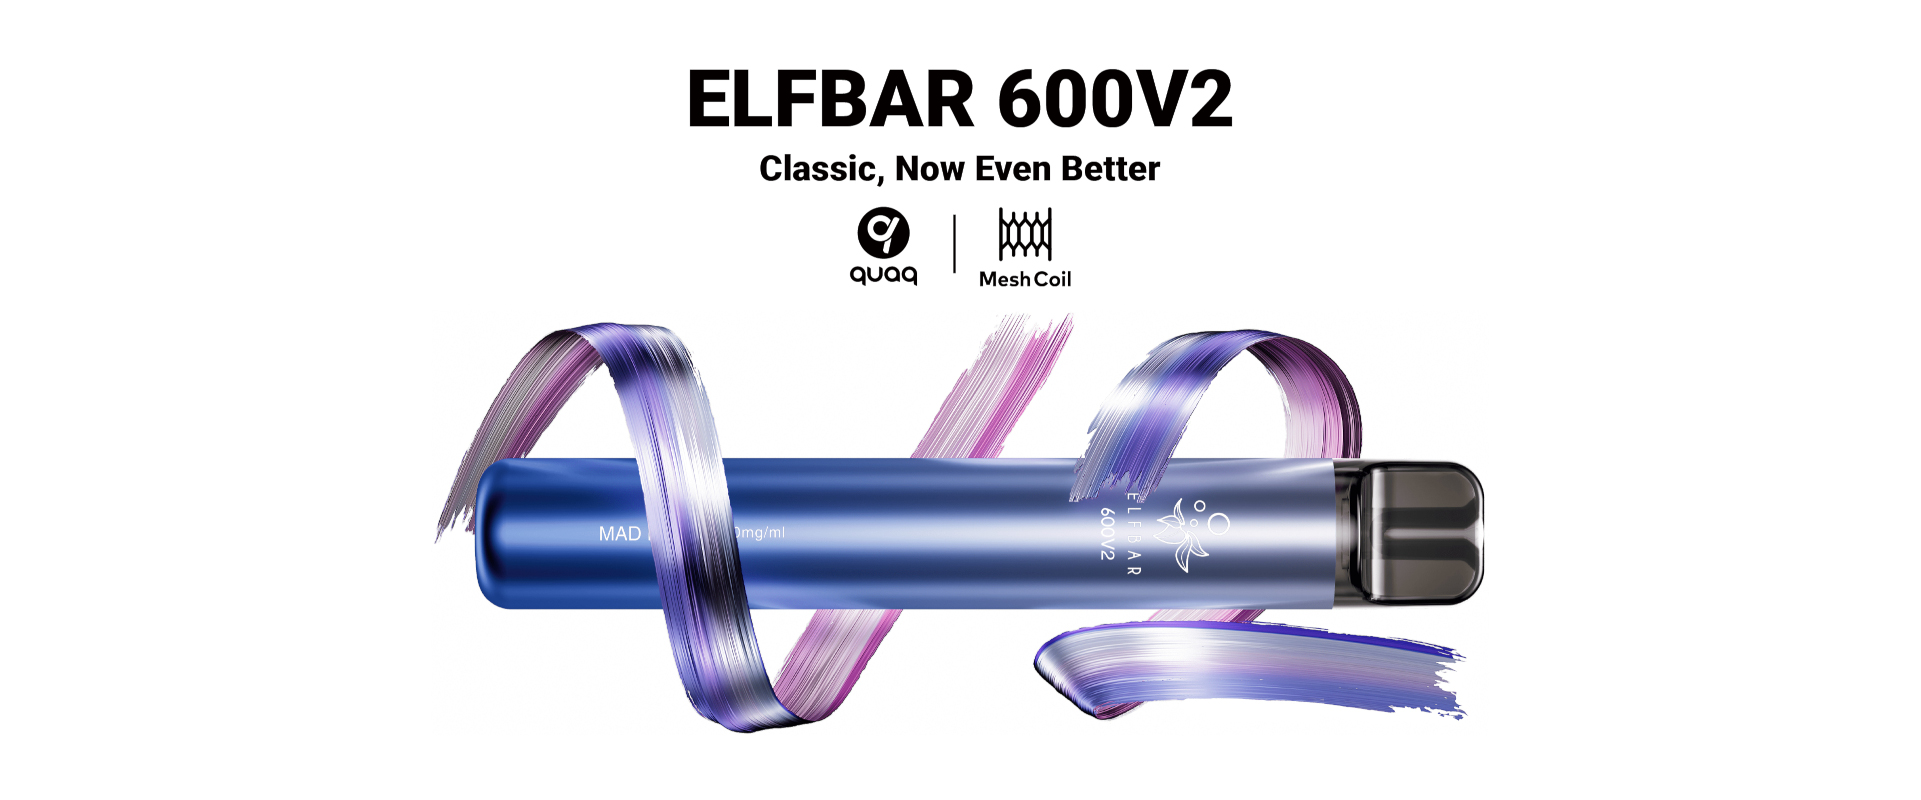 Elfbar 600 V2 now even better with all new mesh coil